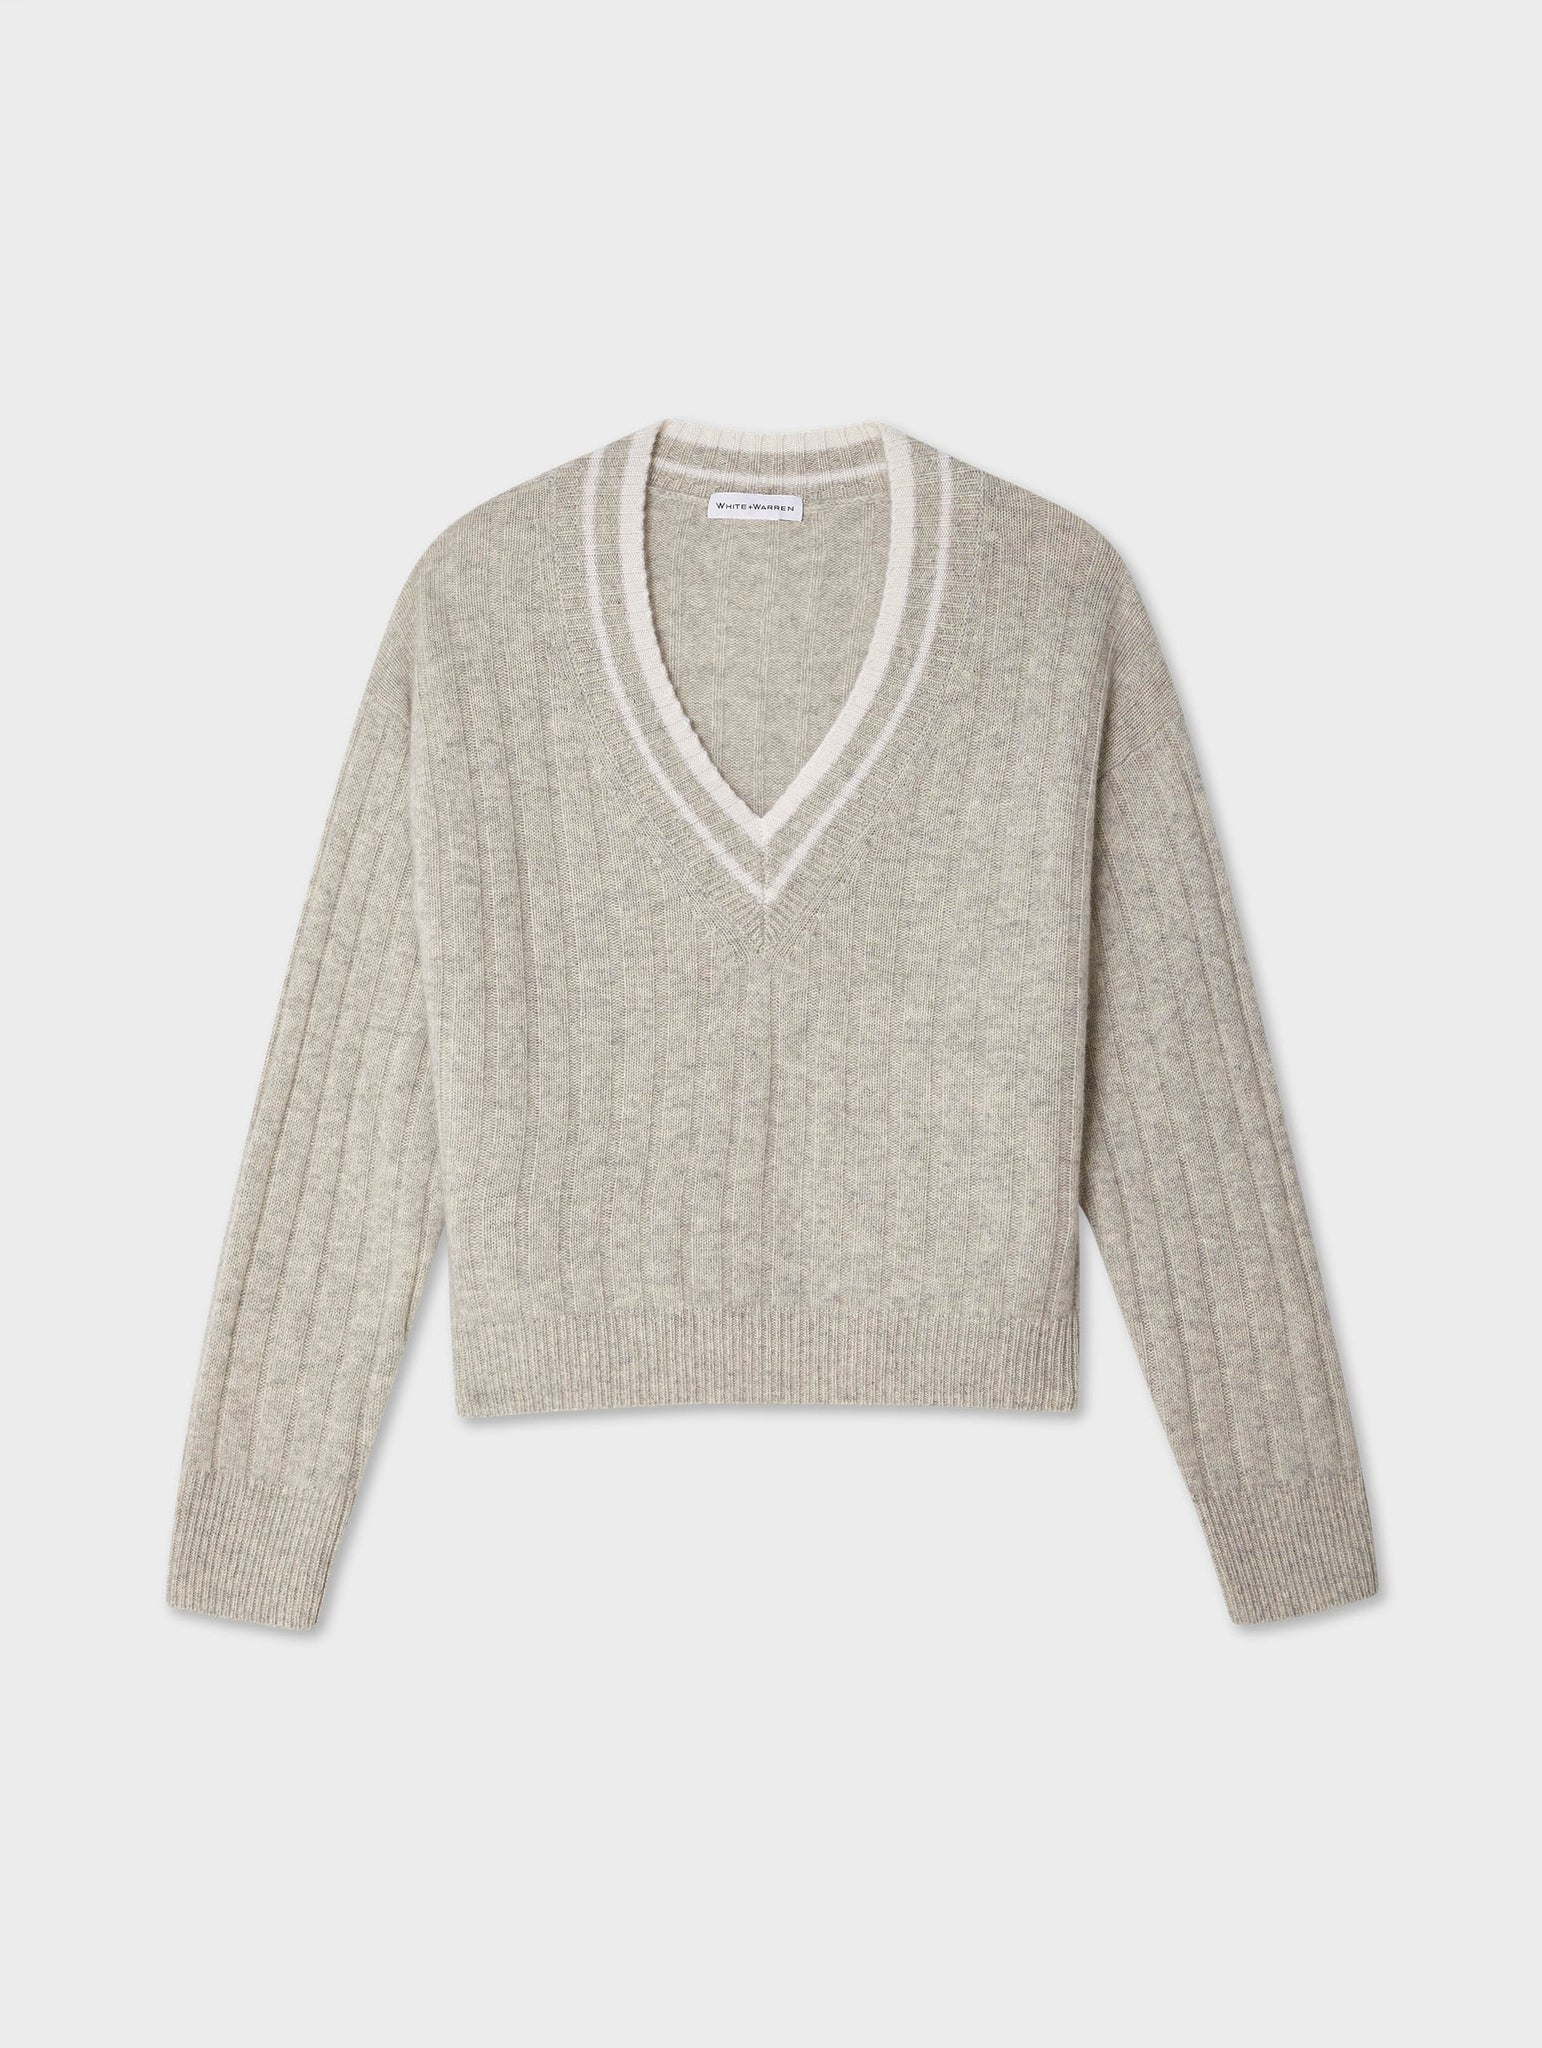 Cashmere Varsity Wide Rib Vneck in Misty Grey Heather and White